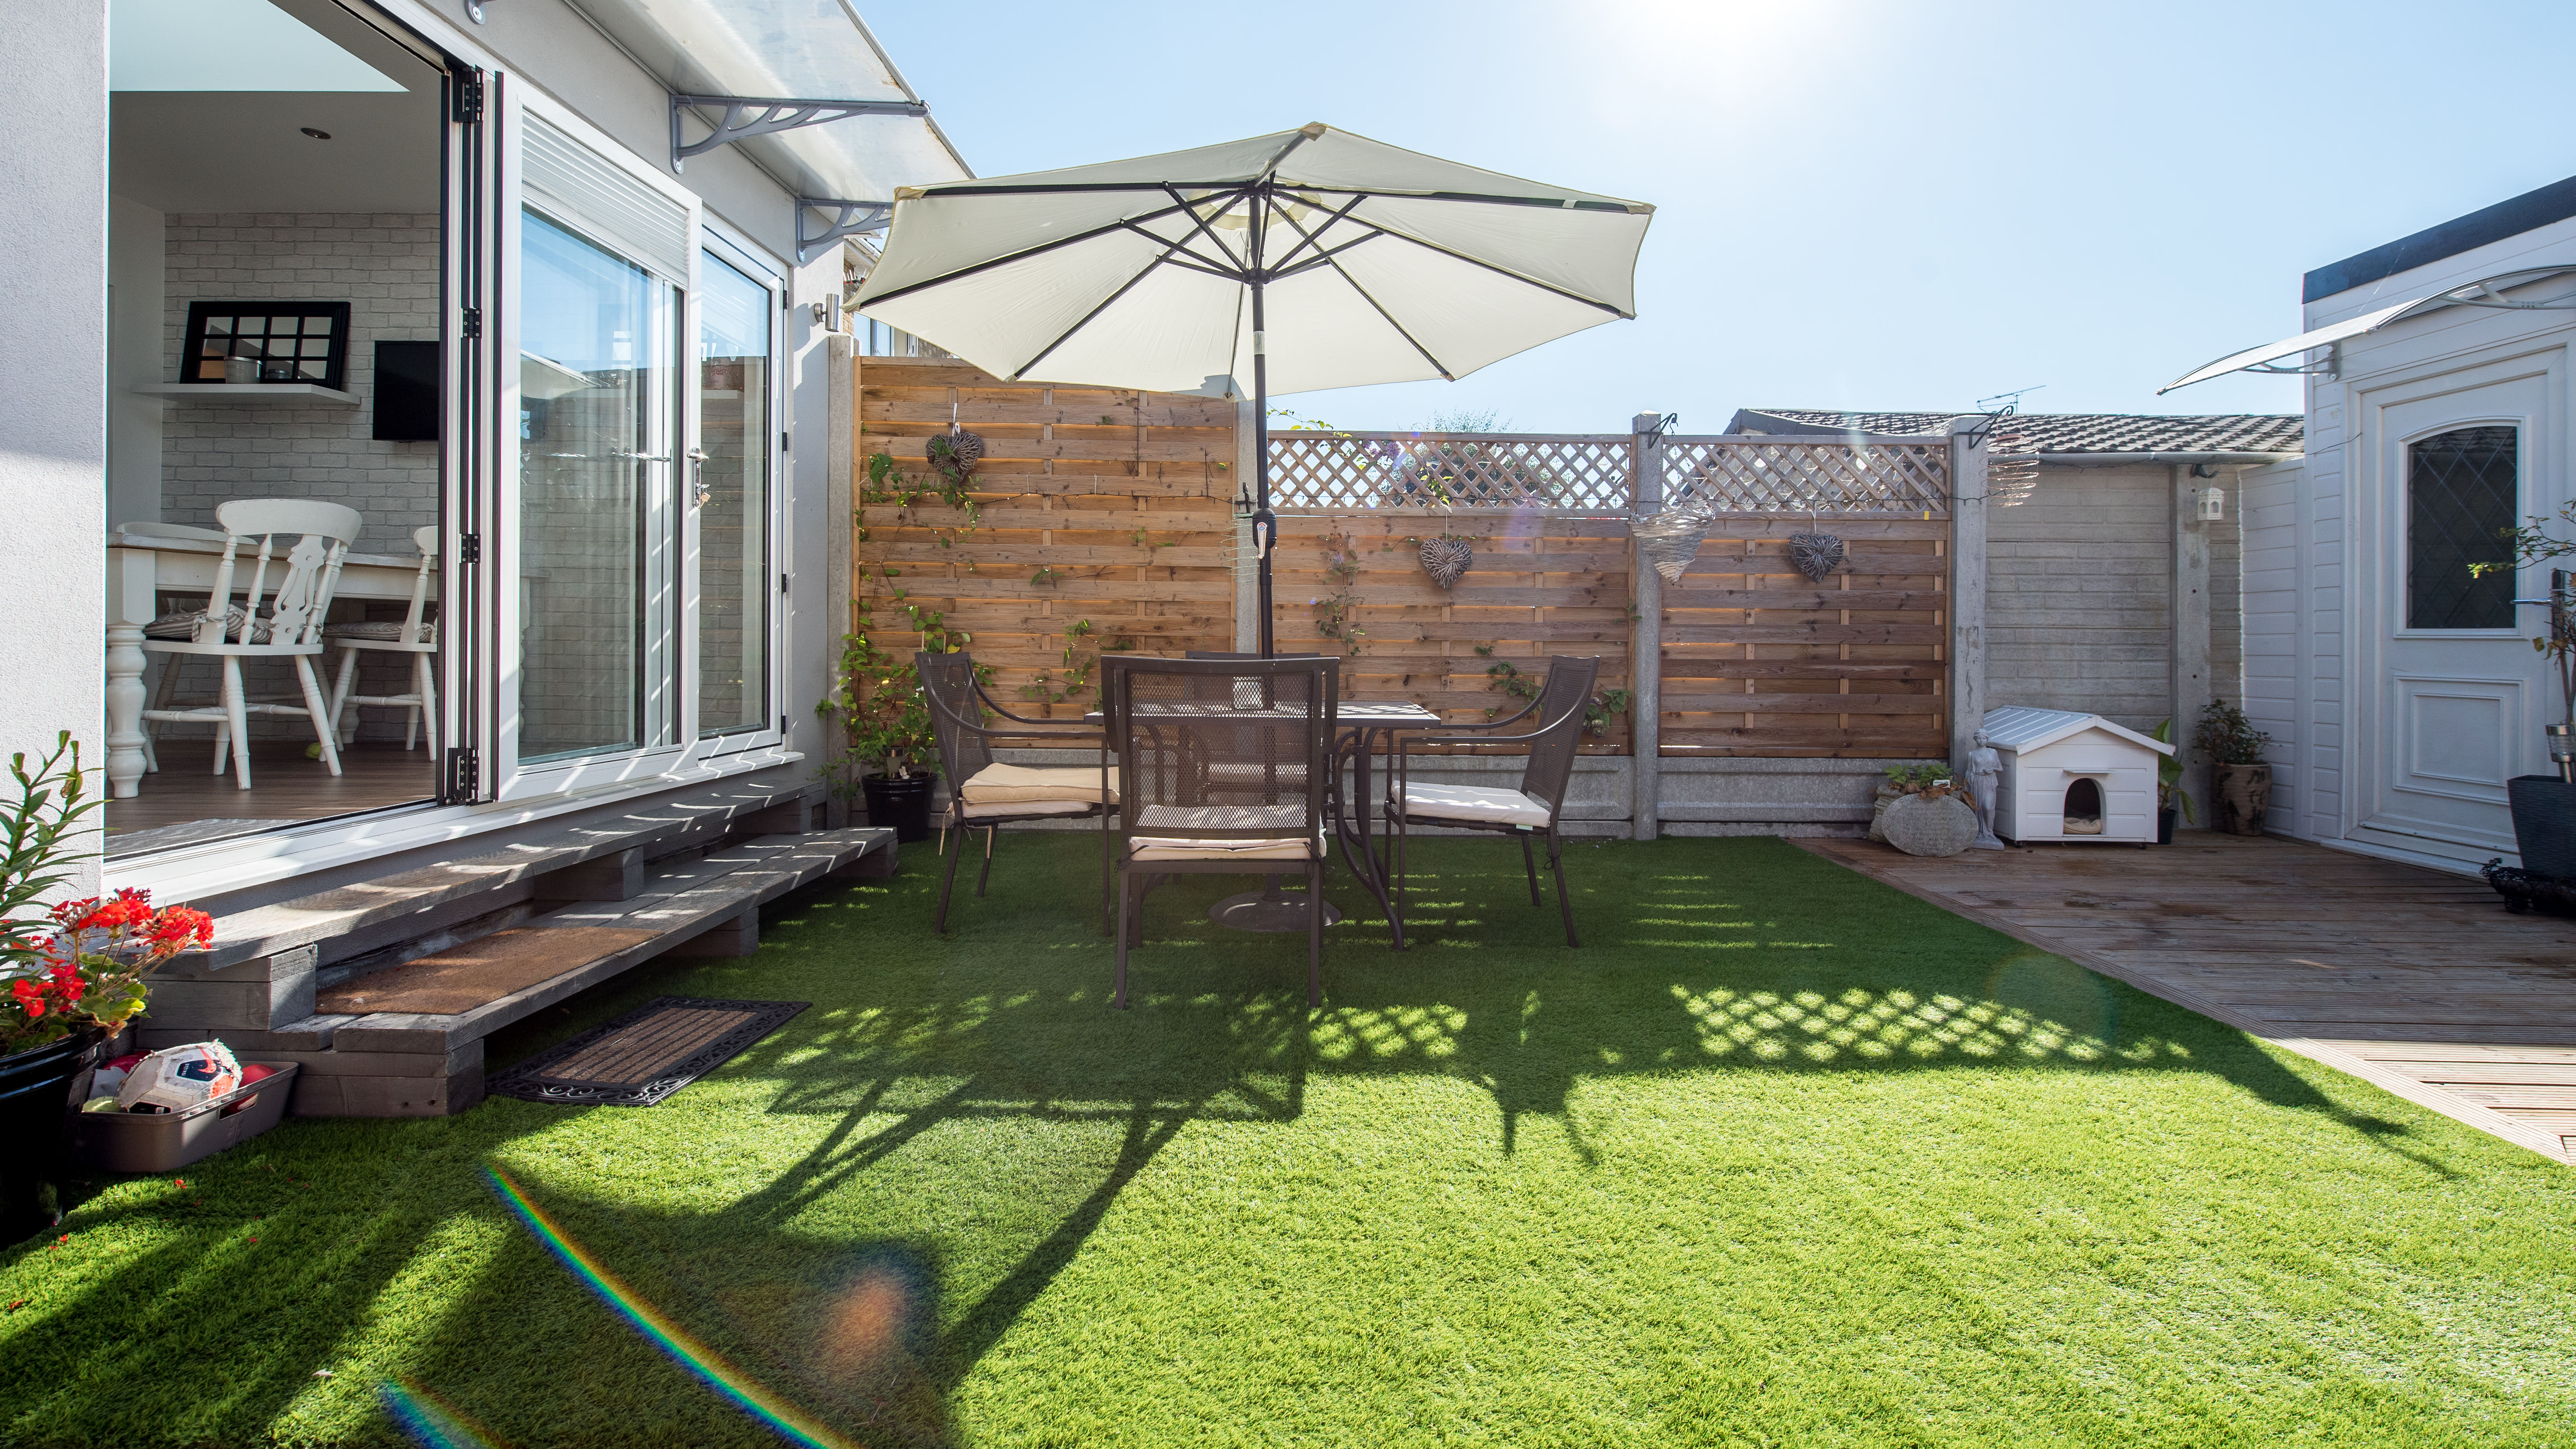 Artificial turf in a back yard with the sun shining